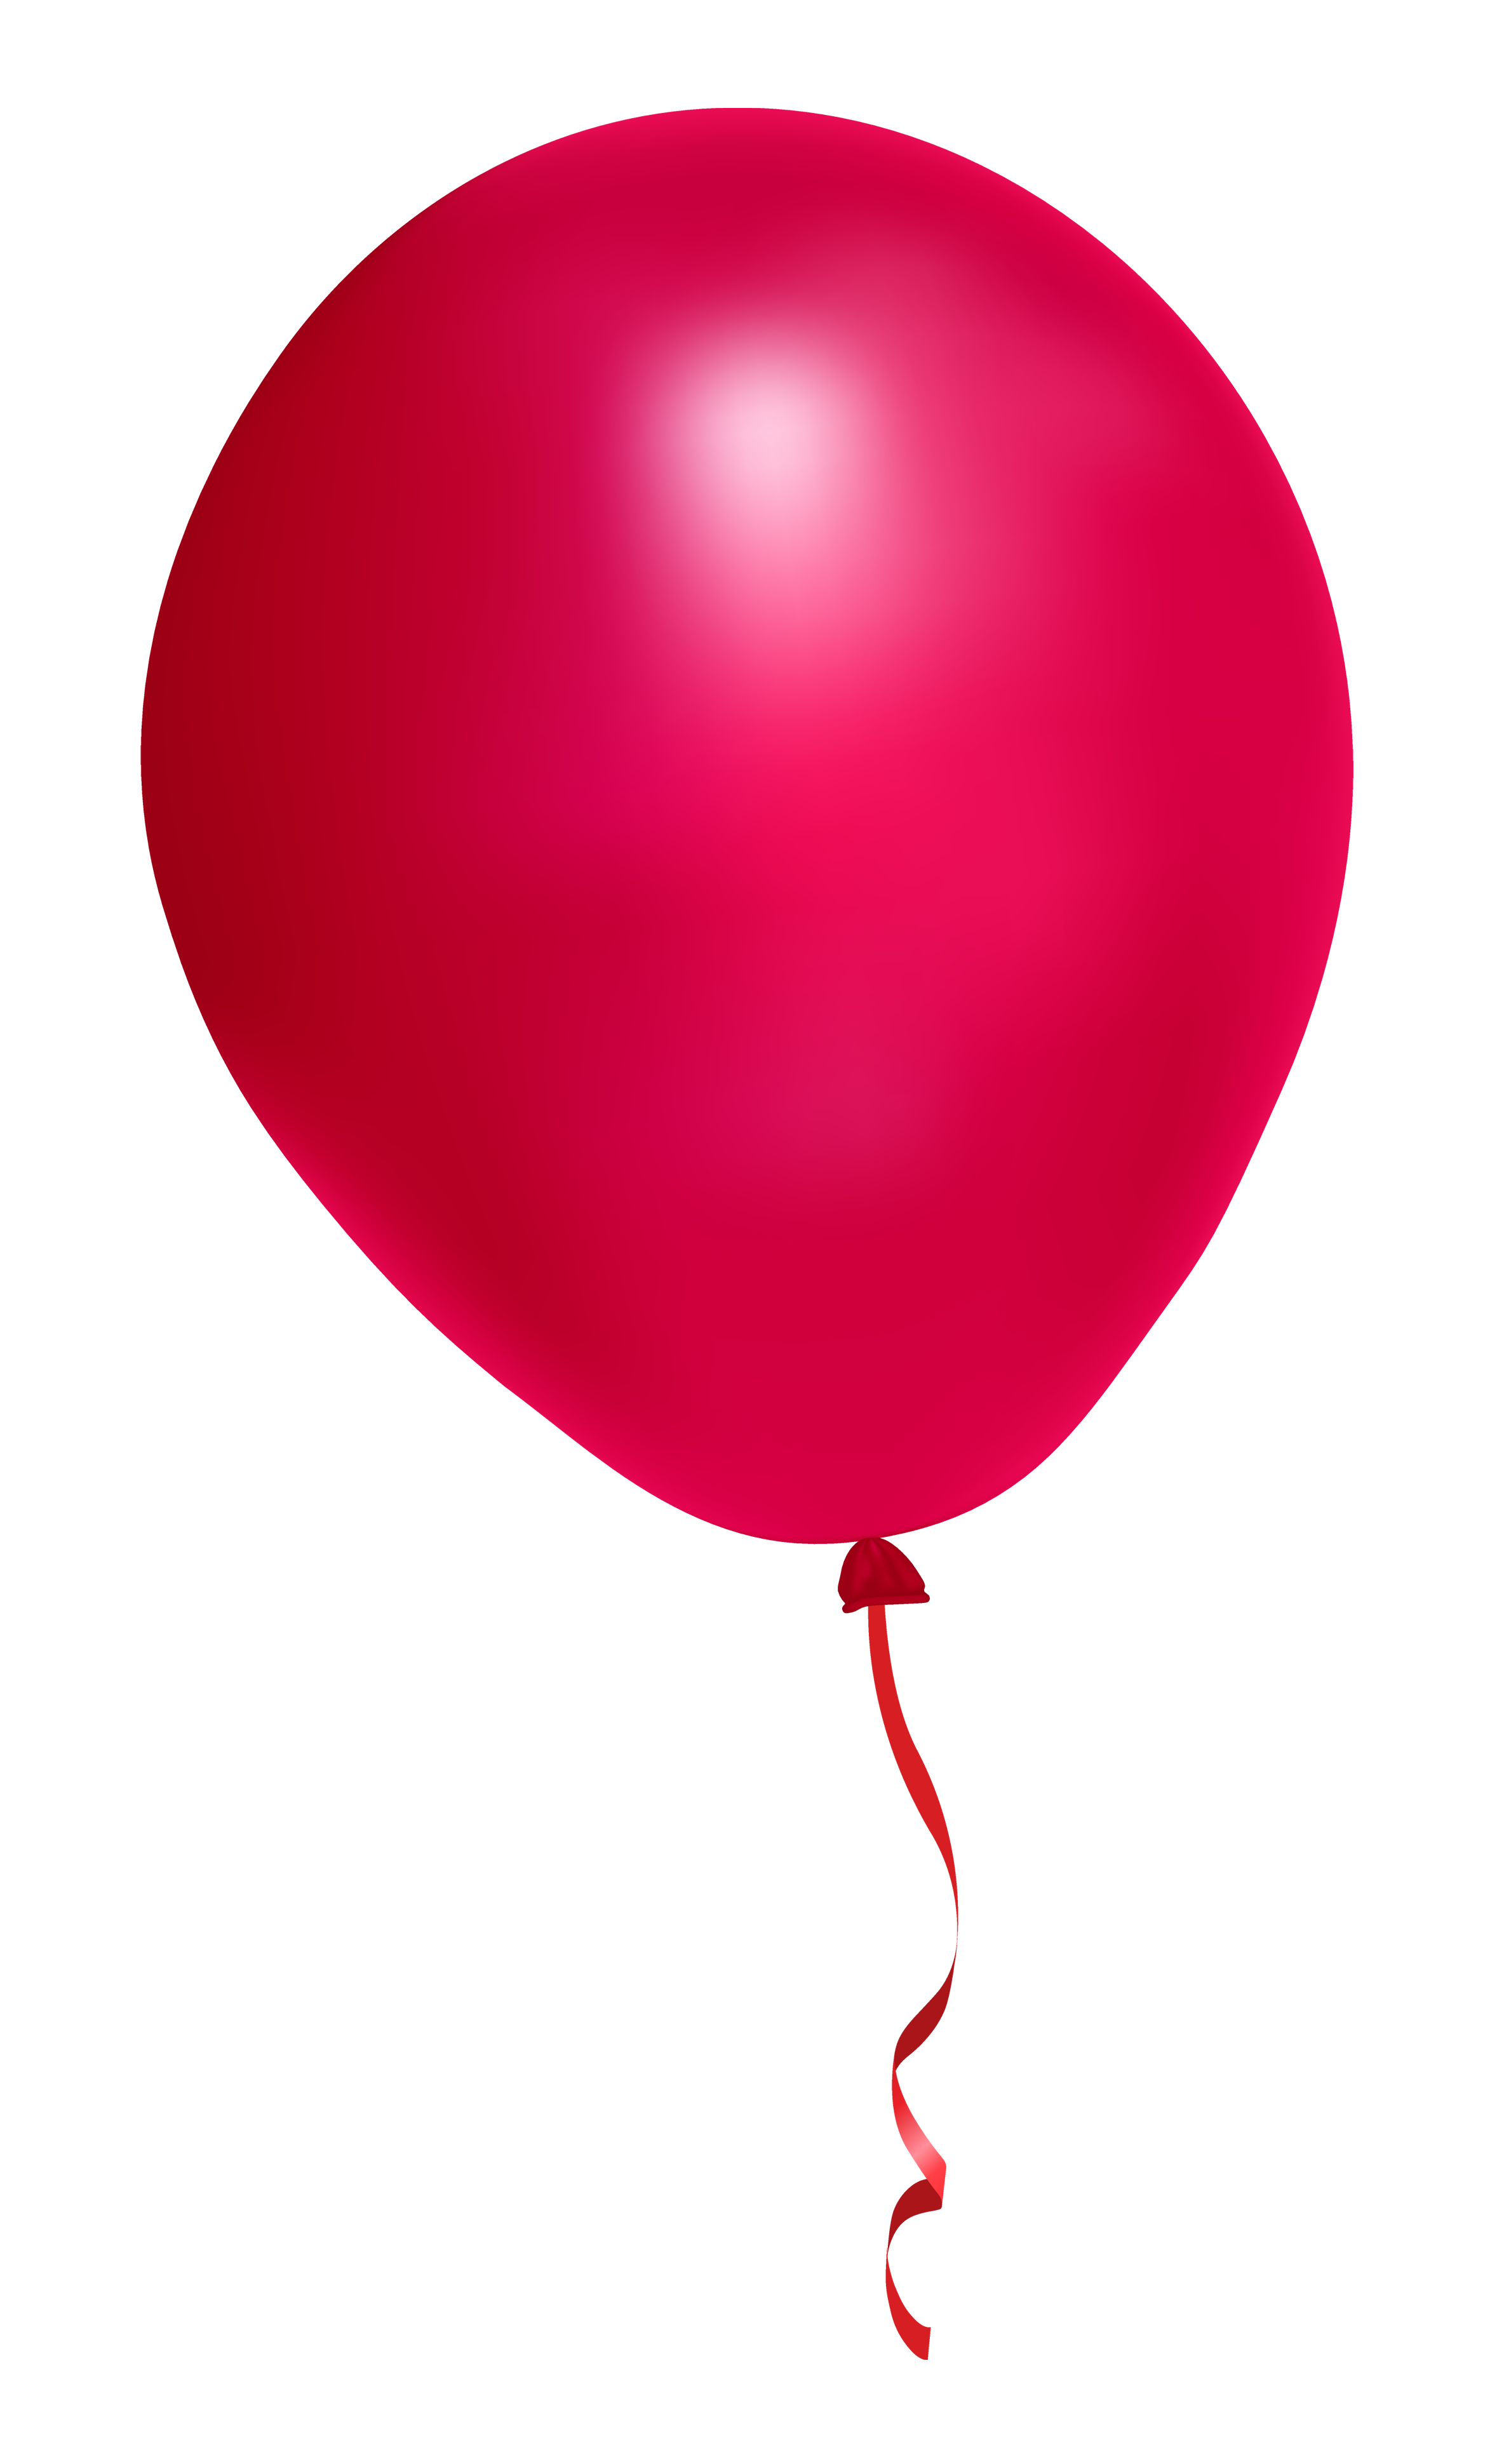 Balloons PNG Free Download